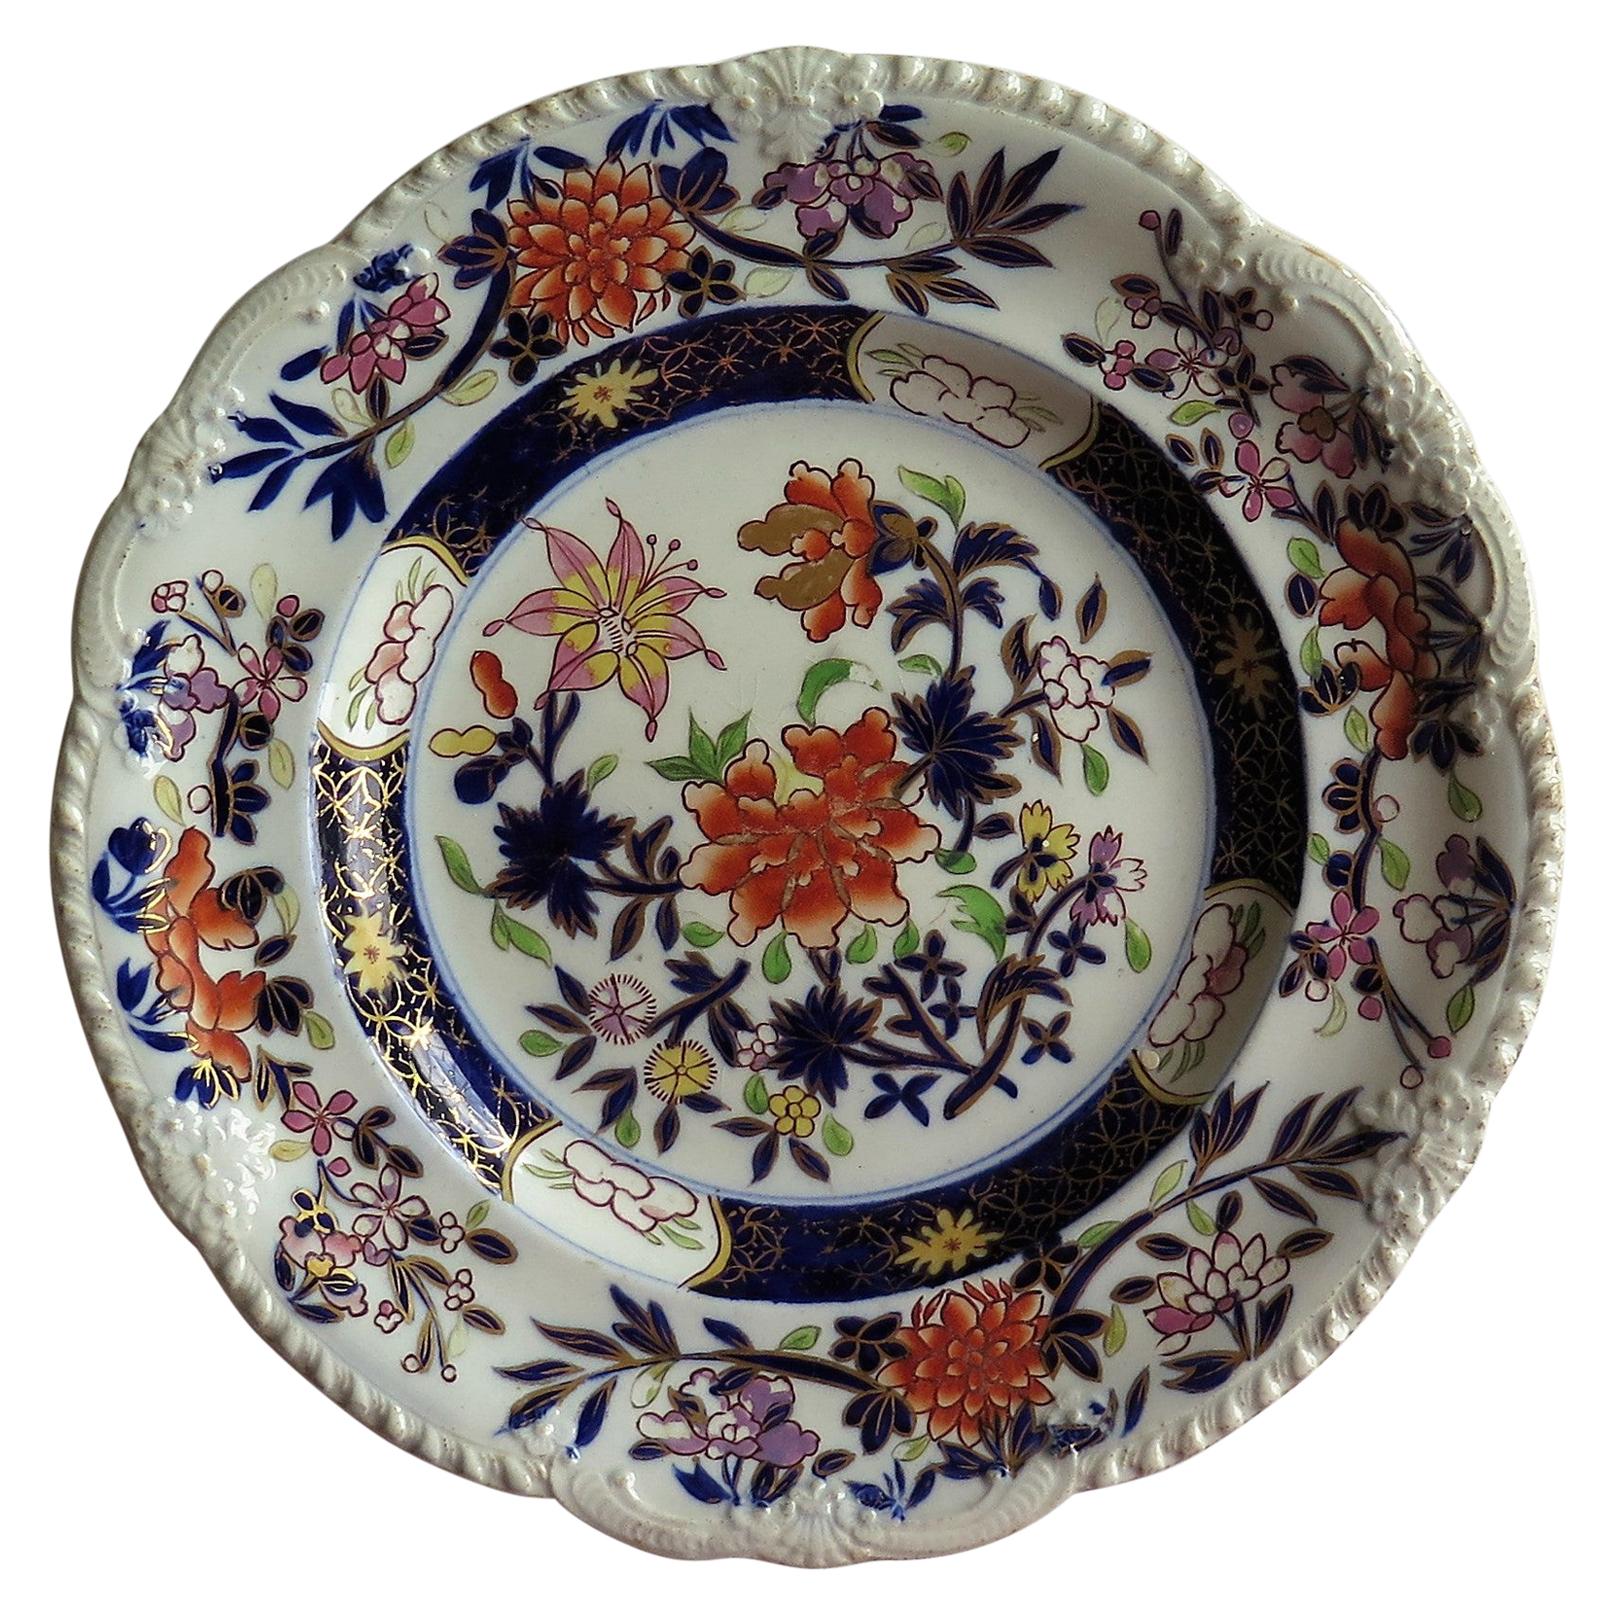 Early Mason's Ironstone Desert Plate in Heavily Floral Japan Pattern, circa 1815